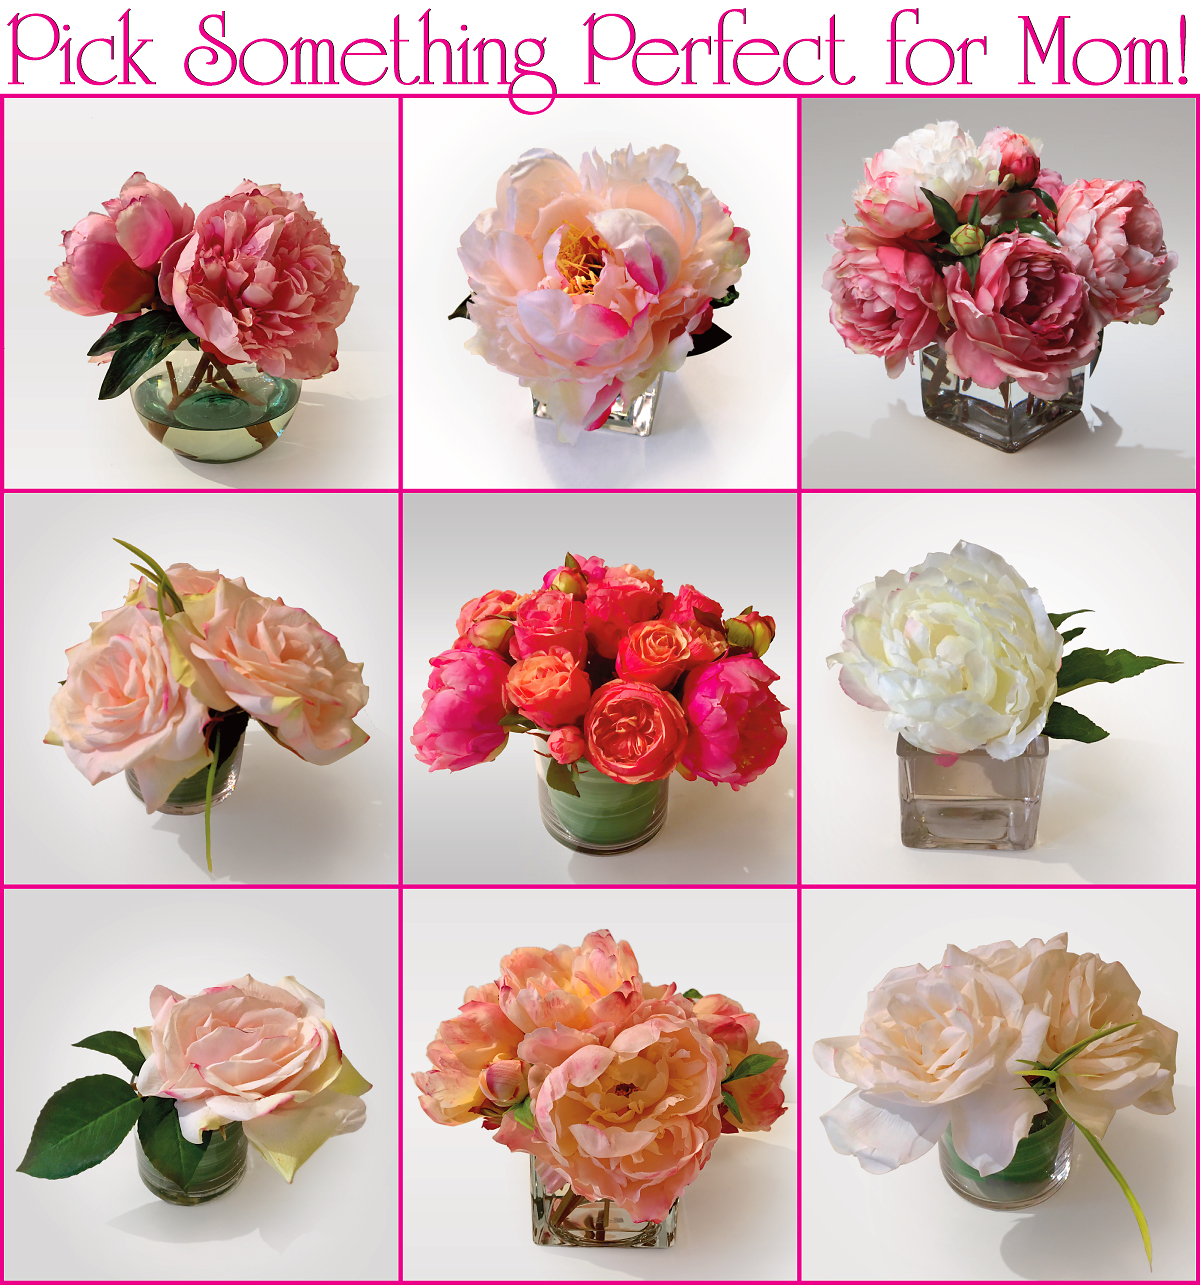 Pick Something Perfect for Mom!